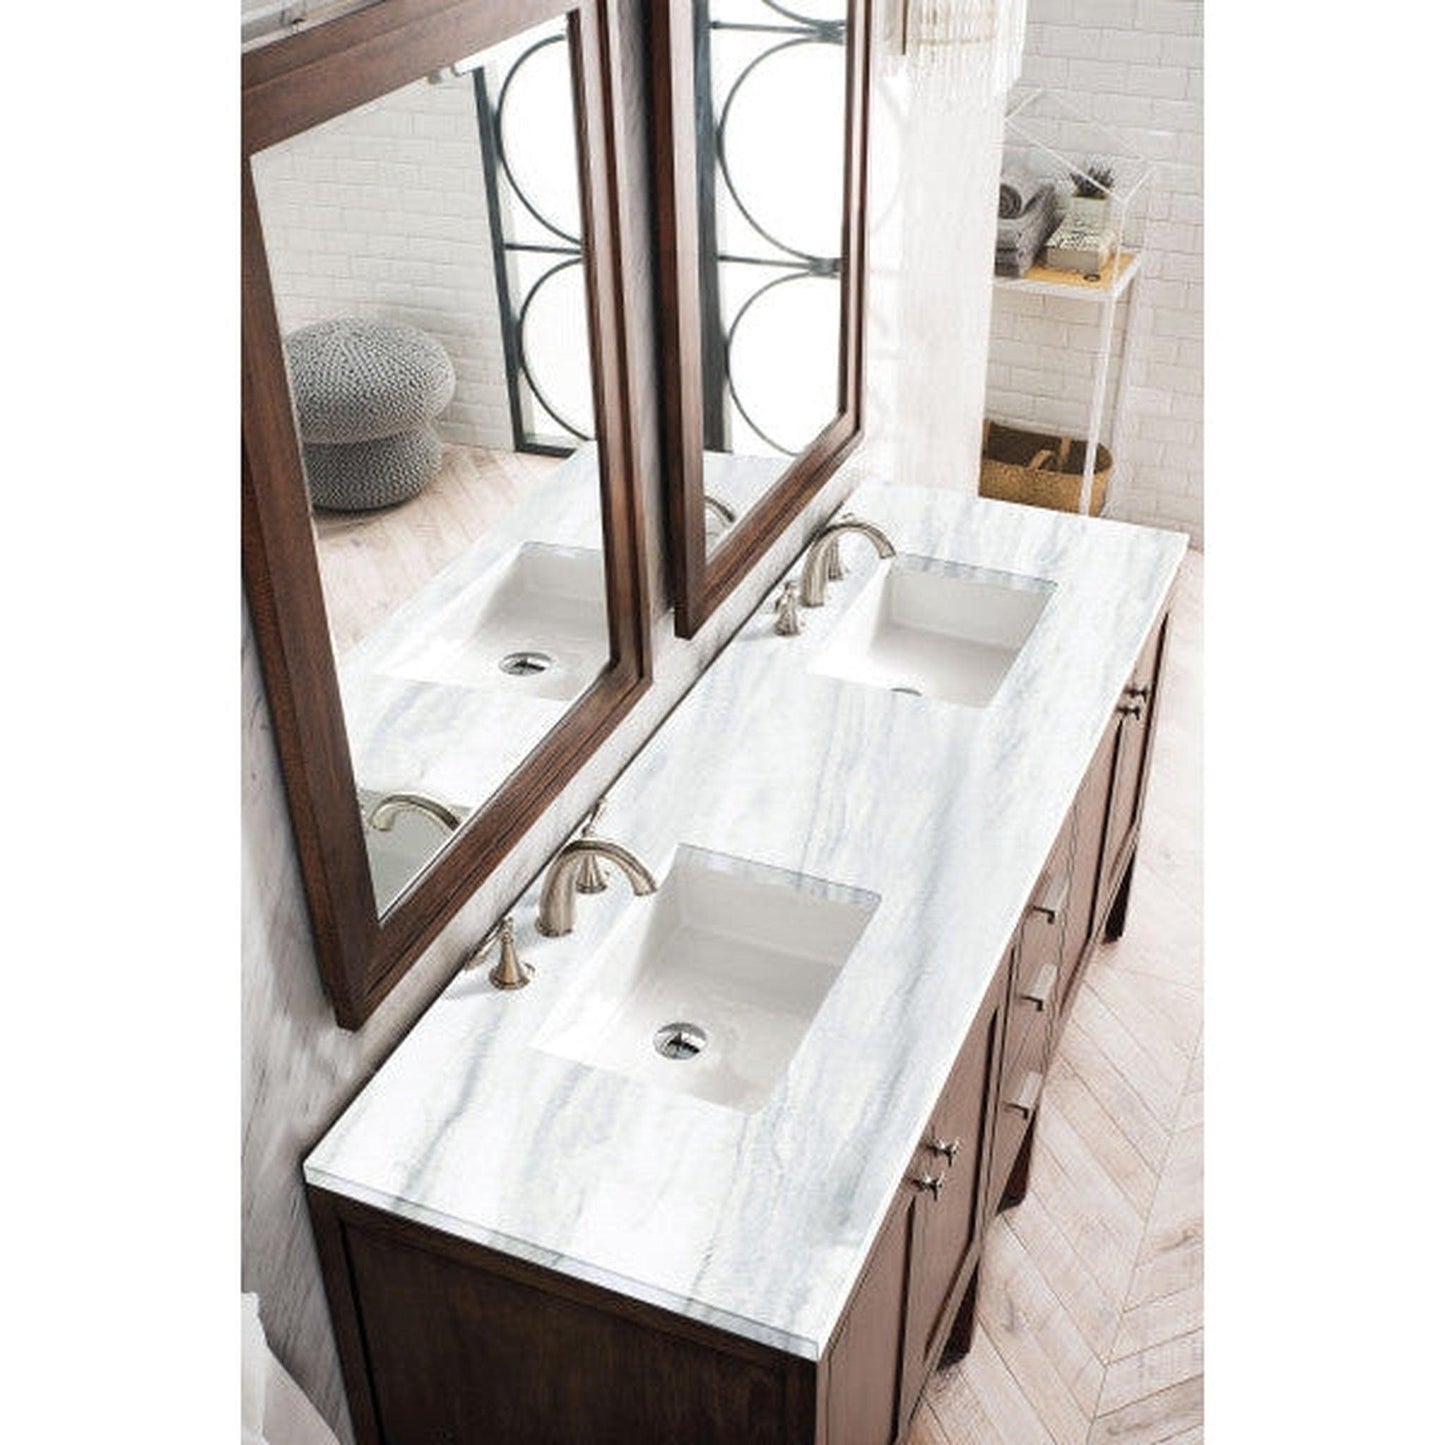 James Martin Addison 72" Double Mid Century Acacia Bathroom Vanity With 1" Arctic Fall Solid Surface Top and Rectangular Ceramic Sink